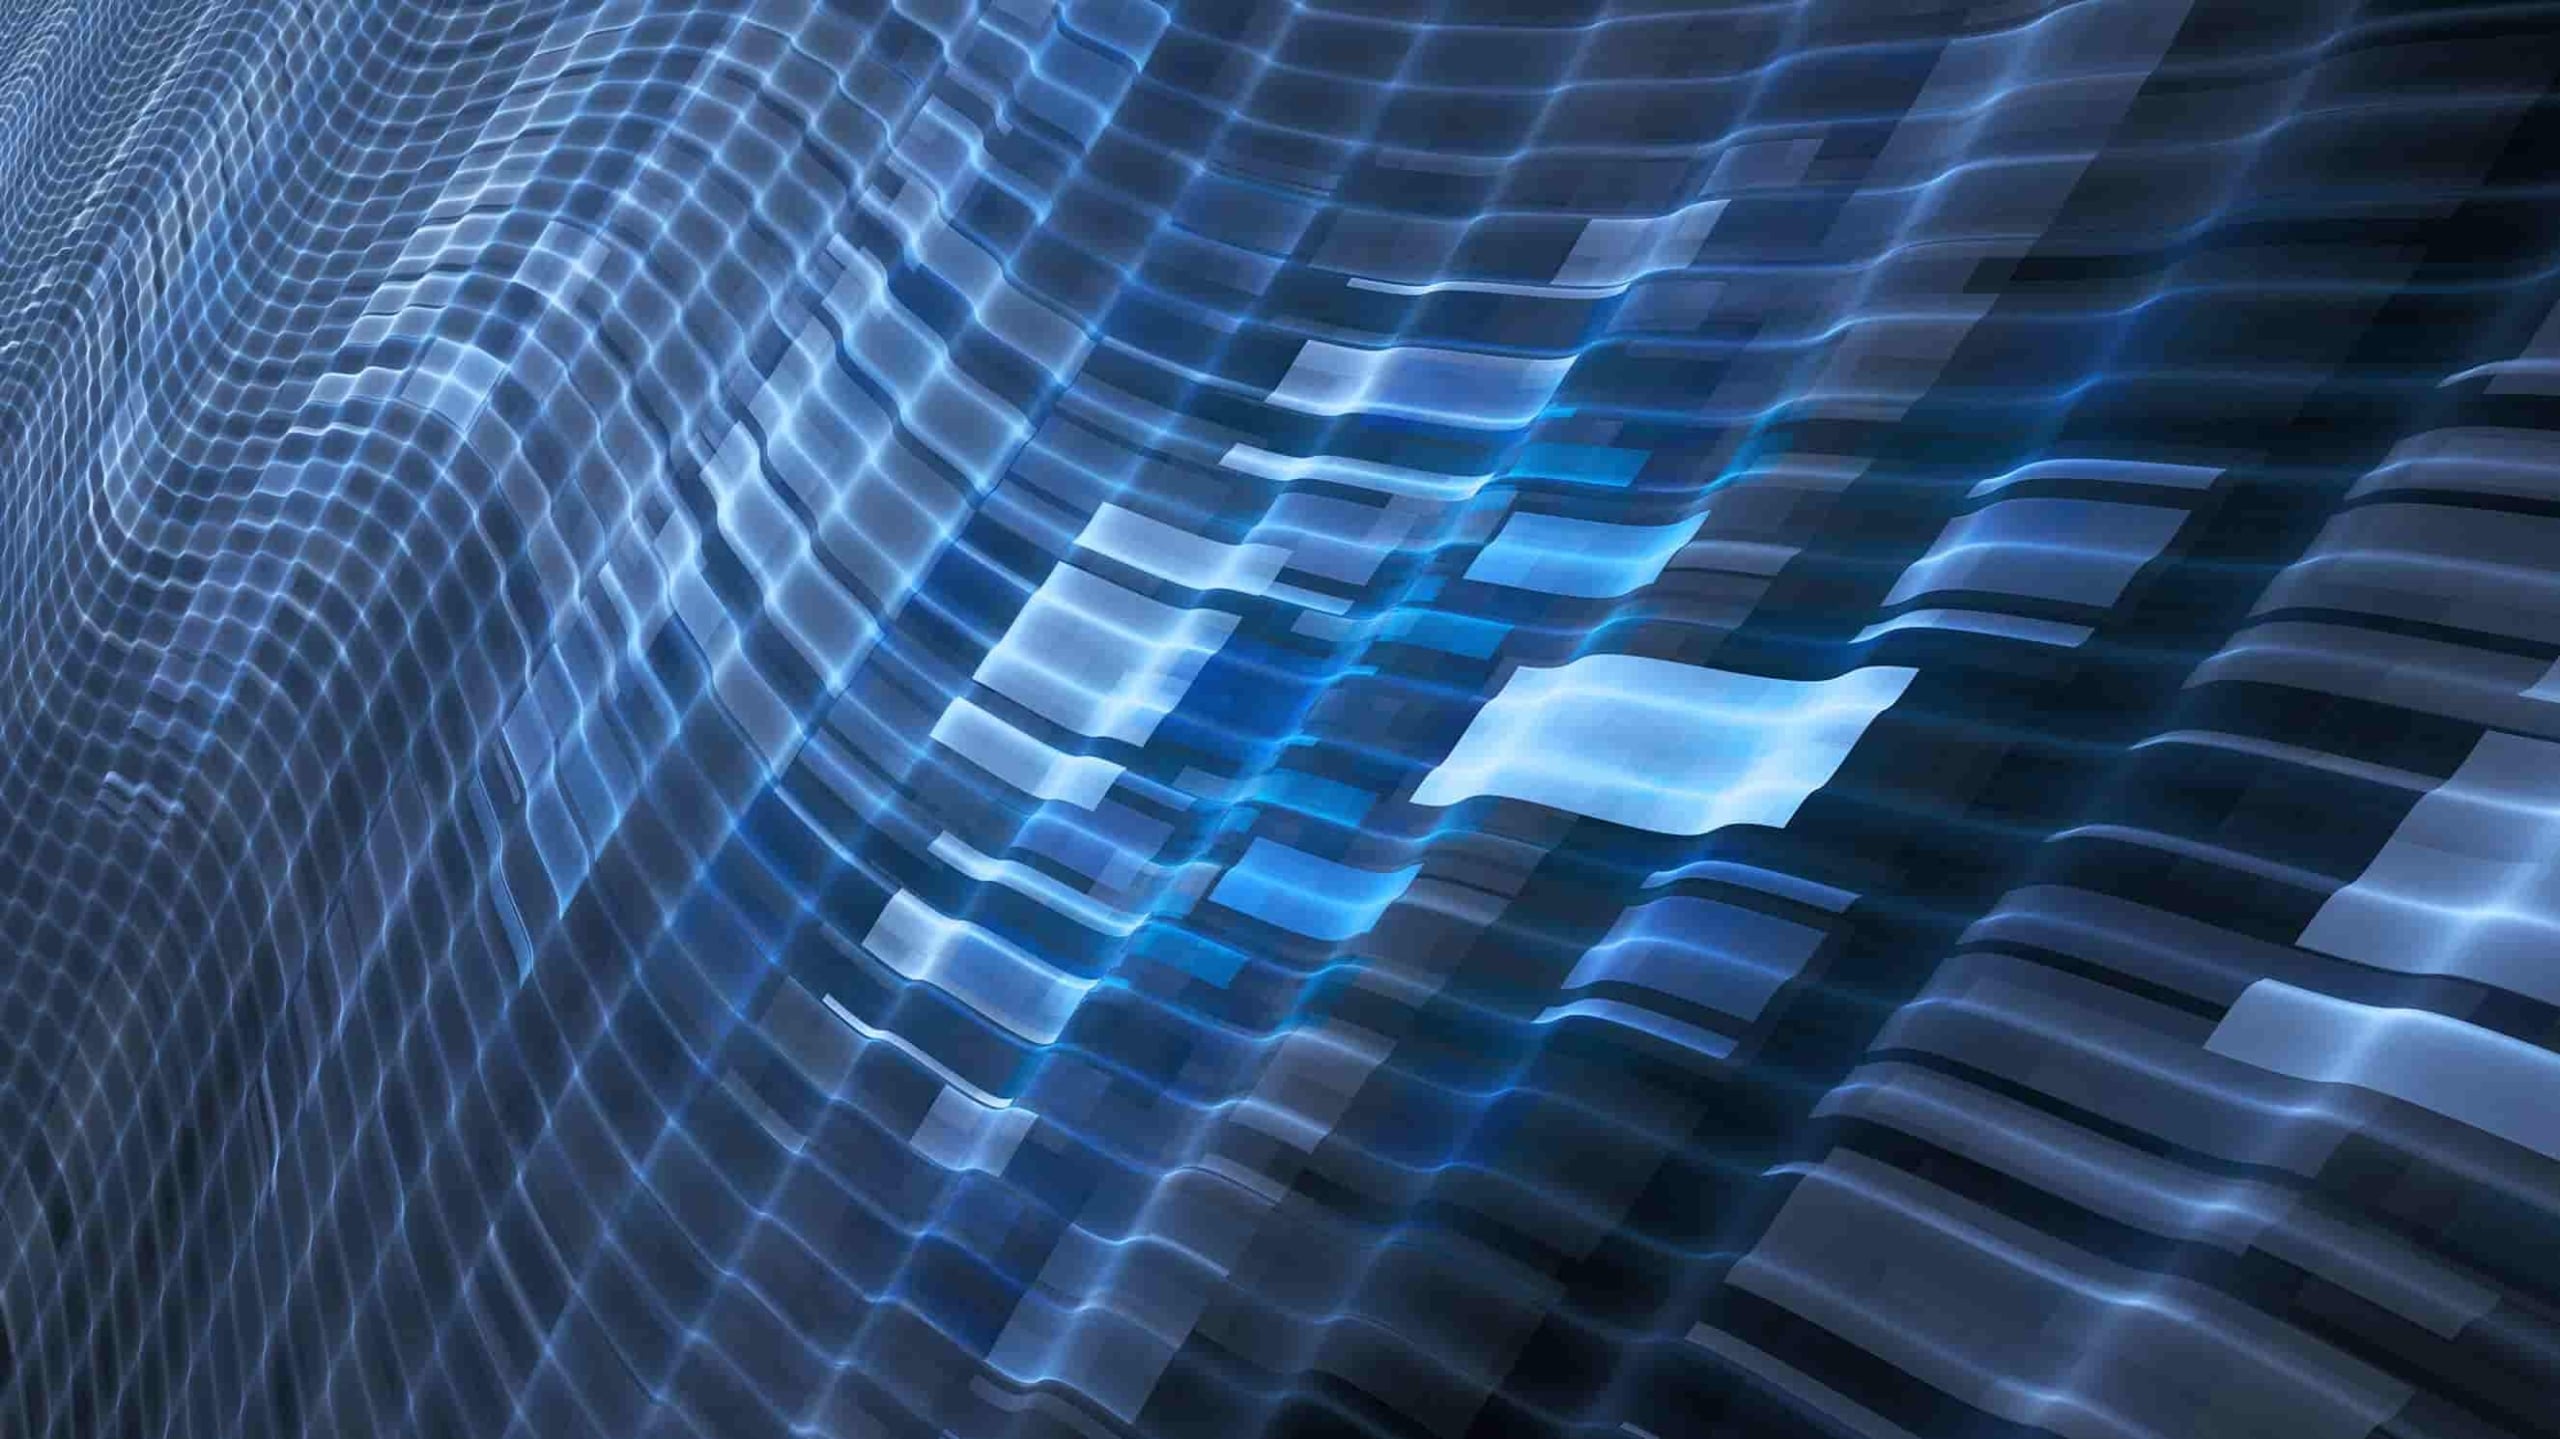 Abstract digital art of a flowing blue and black grid pattern, creating a dynamic and wavy visual texture.